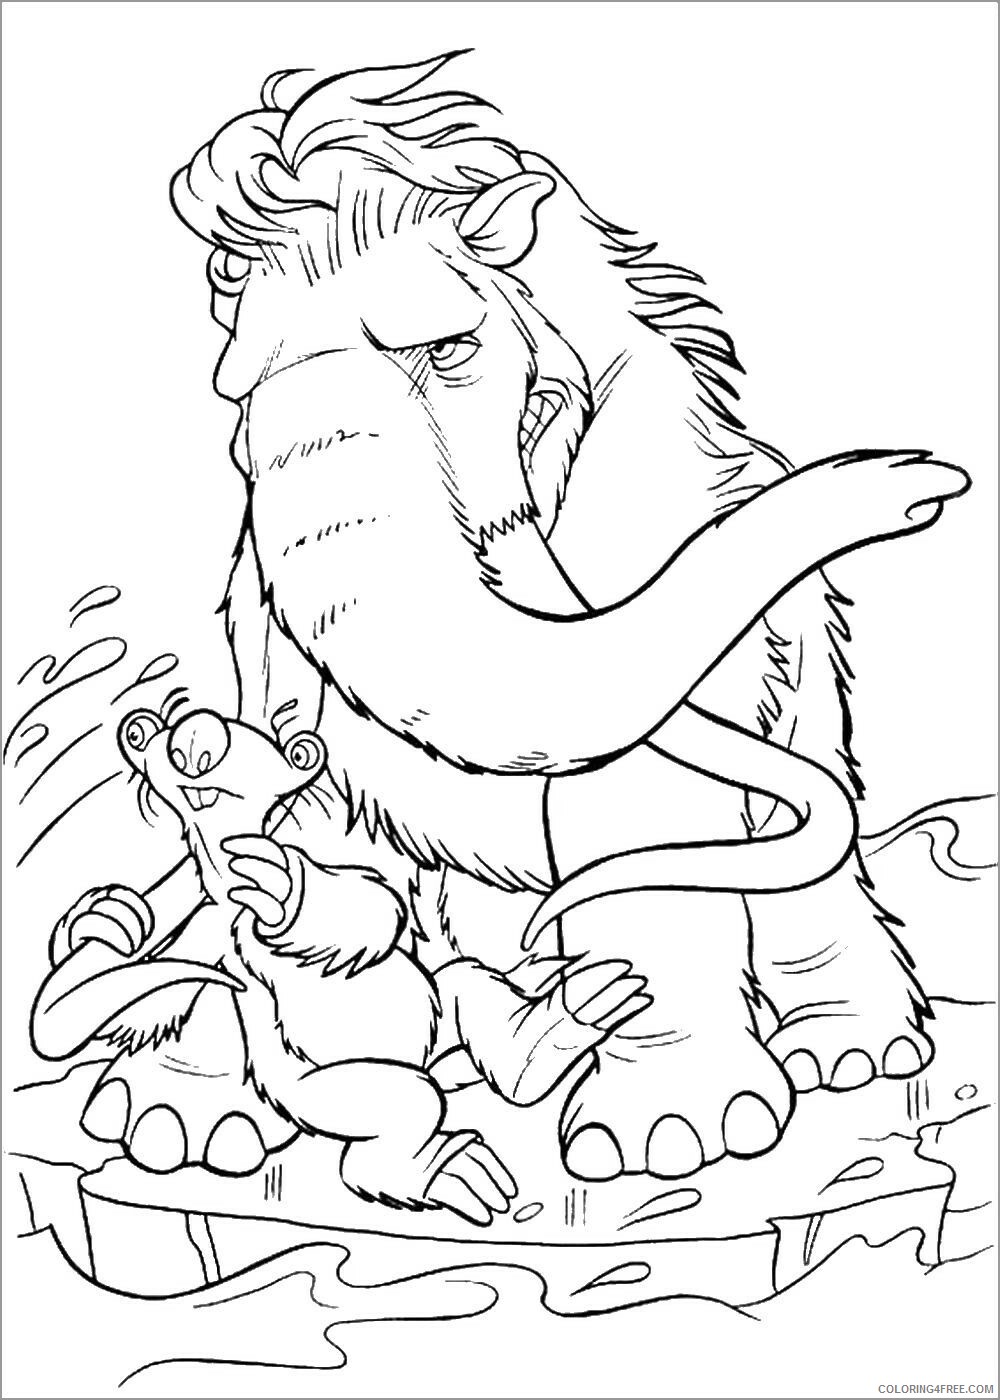 Adult Coloring Pages woolly mammoth for adults Printable 2020 082 Coloring4free